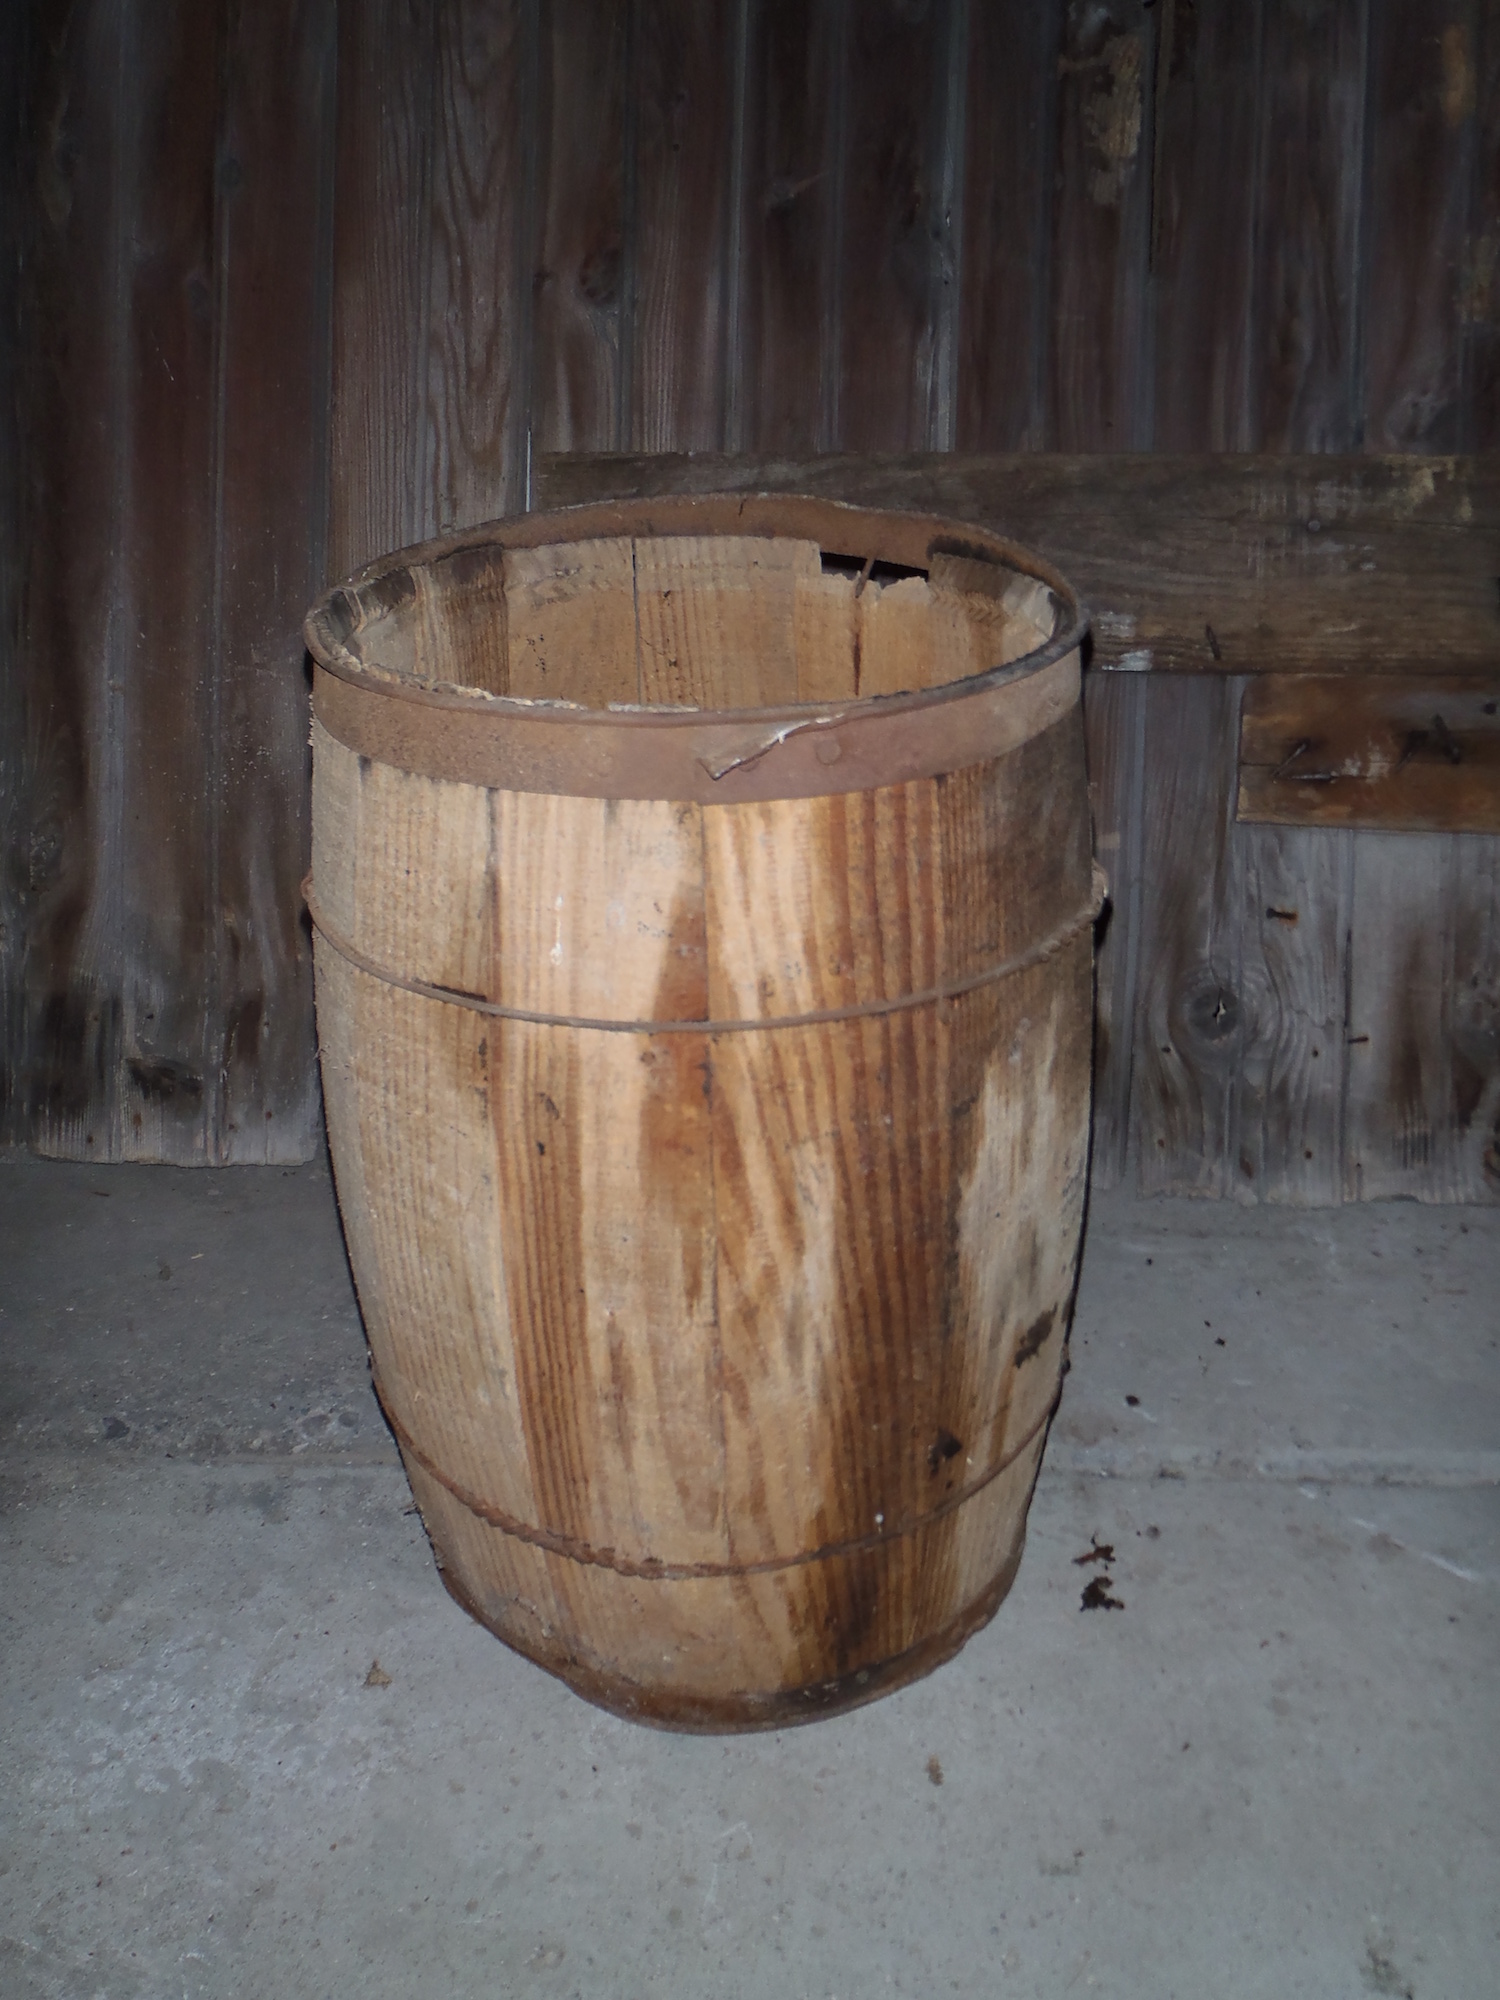 A wooden barrel salvaged from a barn deconstruction site